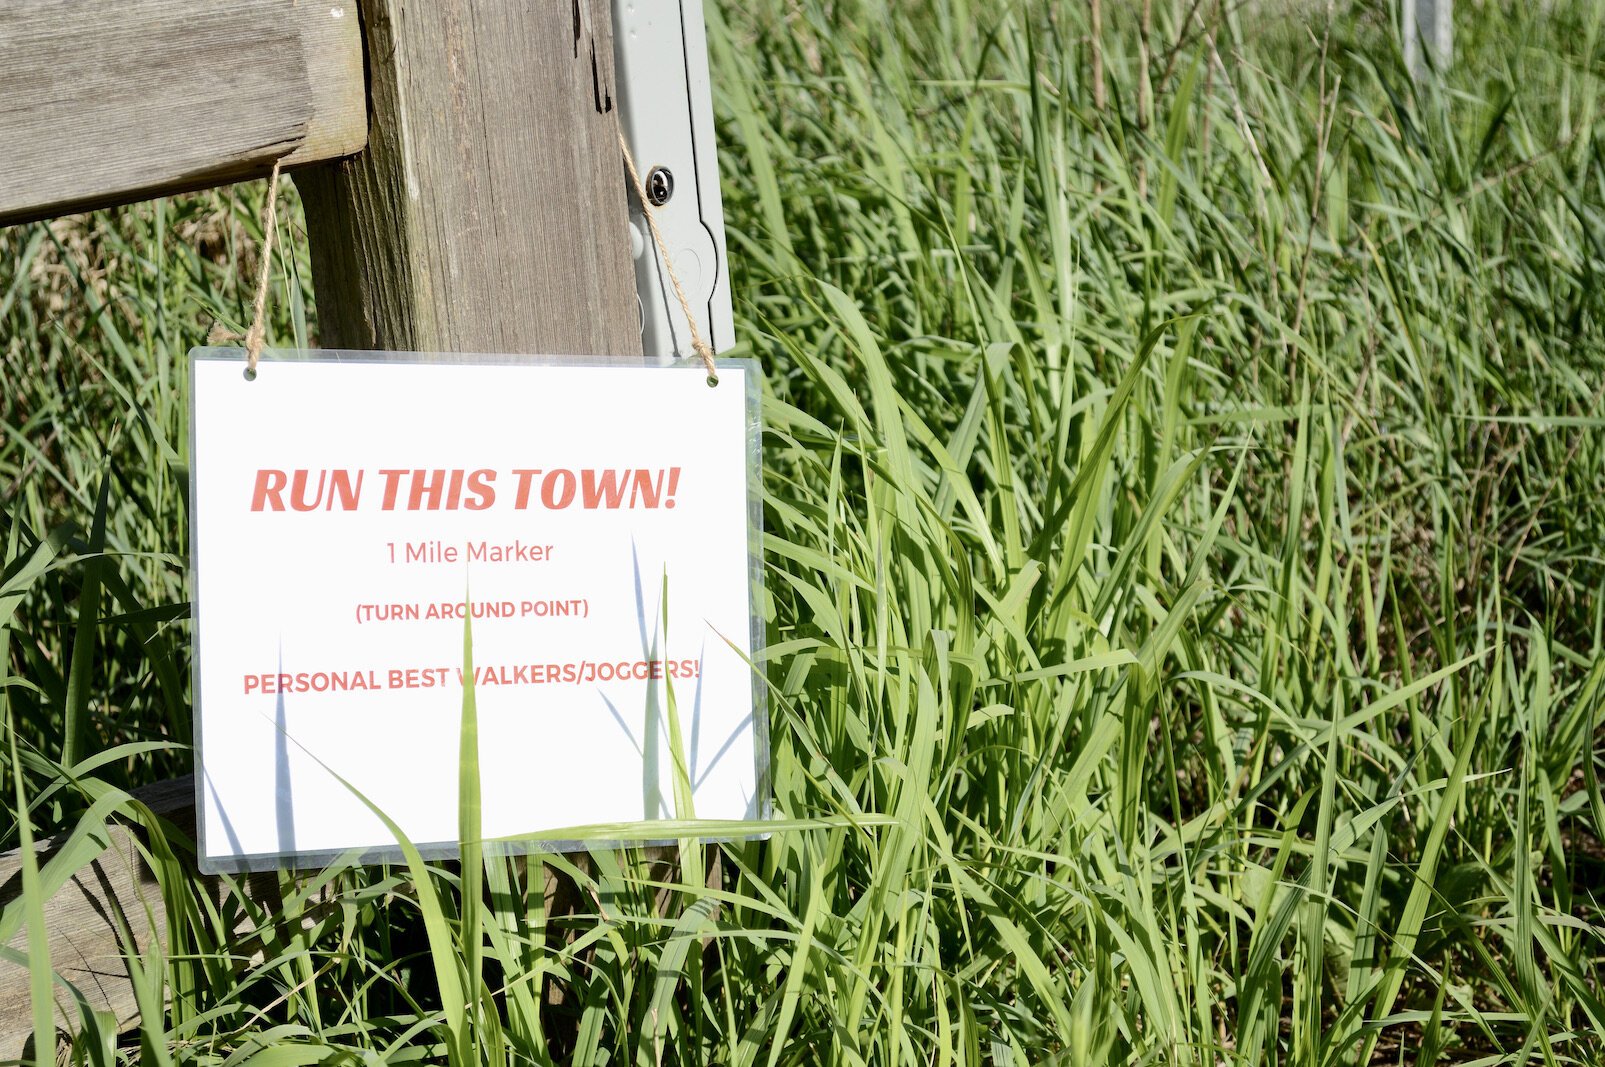 A sign post along the route of the Run This Town event.